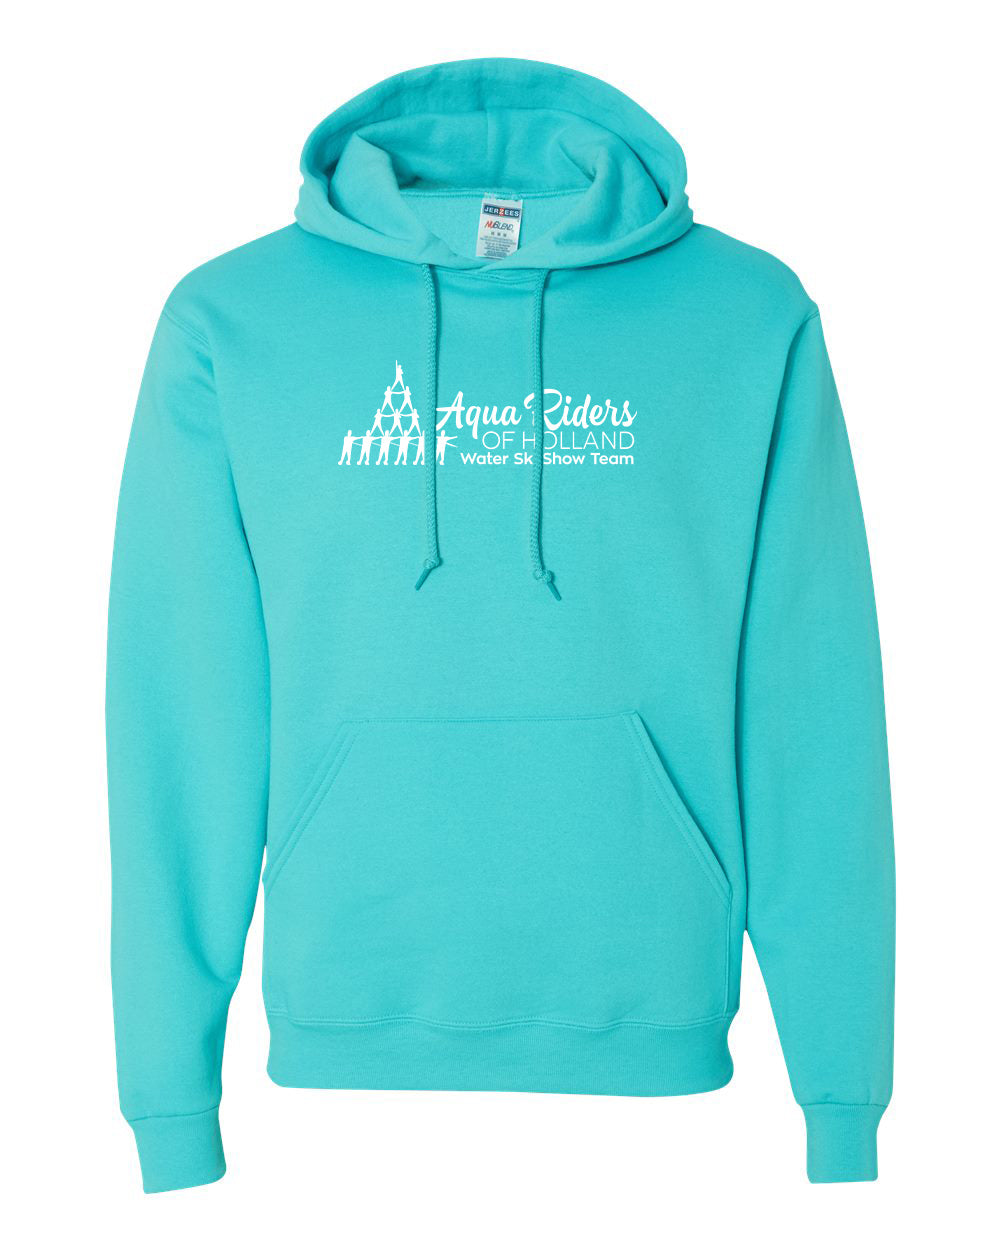 Aqua Riders - Adult Hoodie - 996MR (color options available)